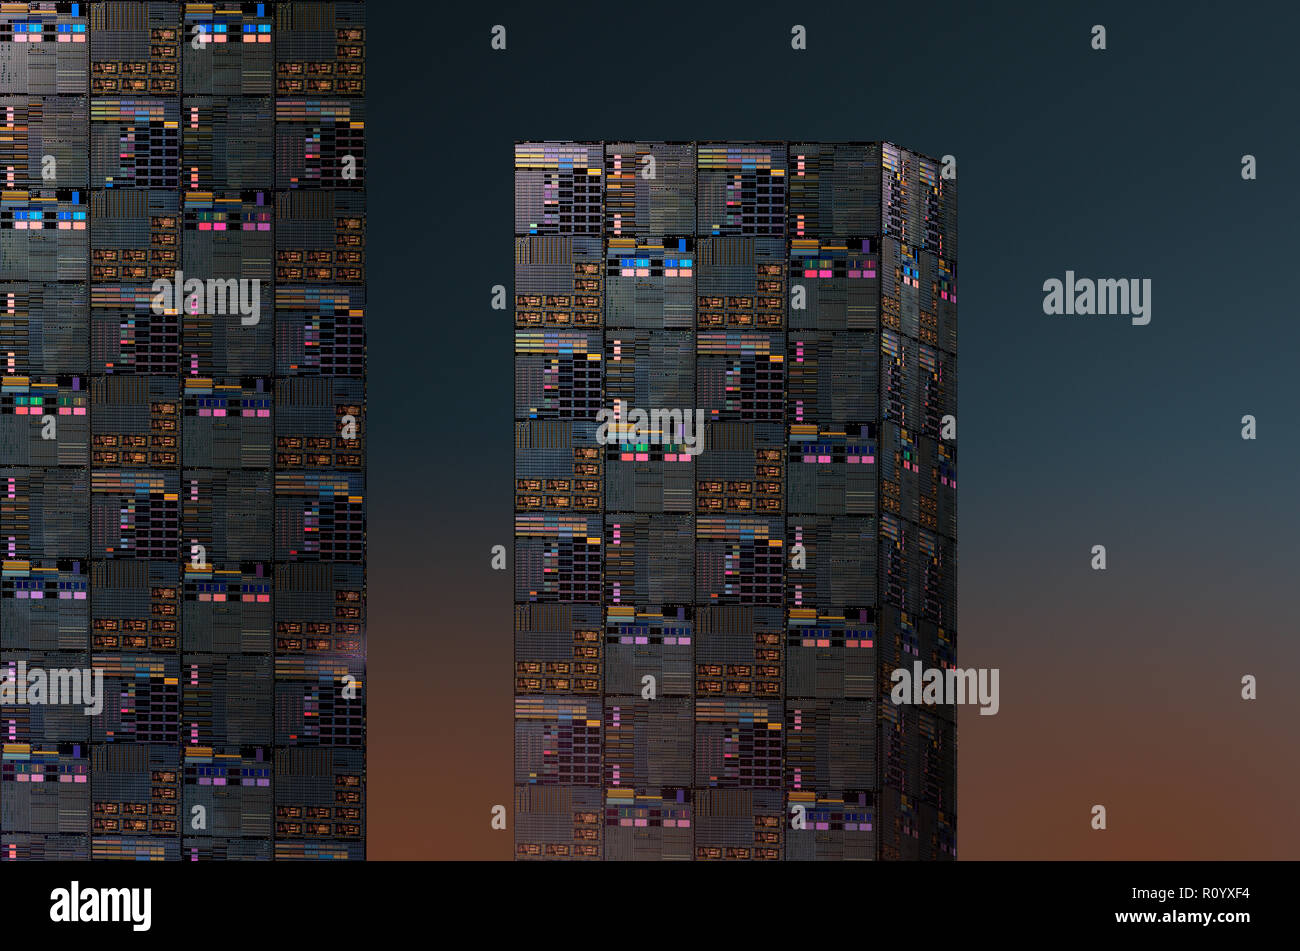 Skyline view with two tower block structures made up of stacked computer servers against graduated sunset background Stock Photo